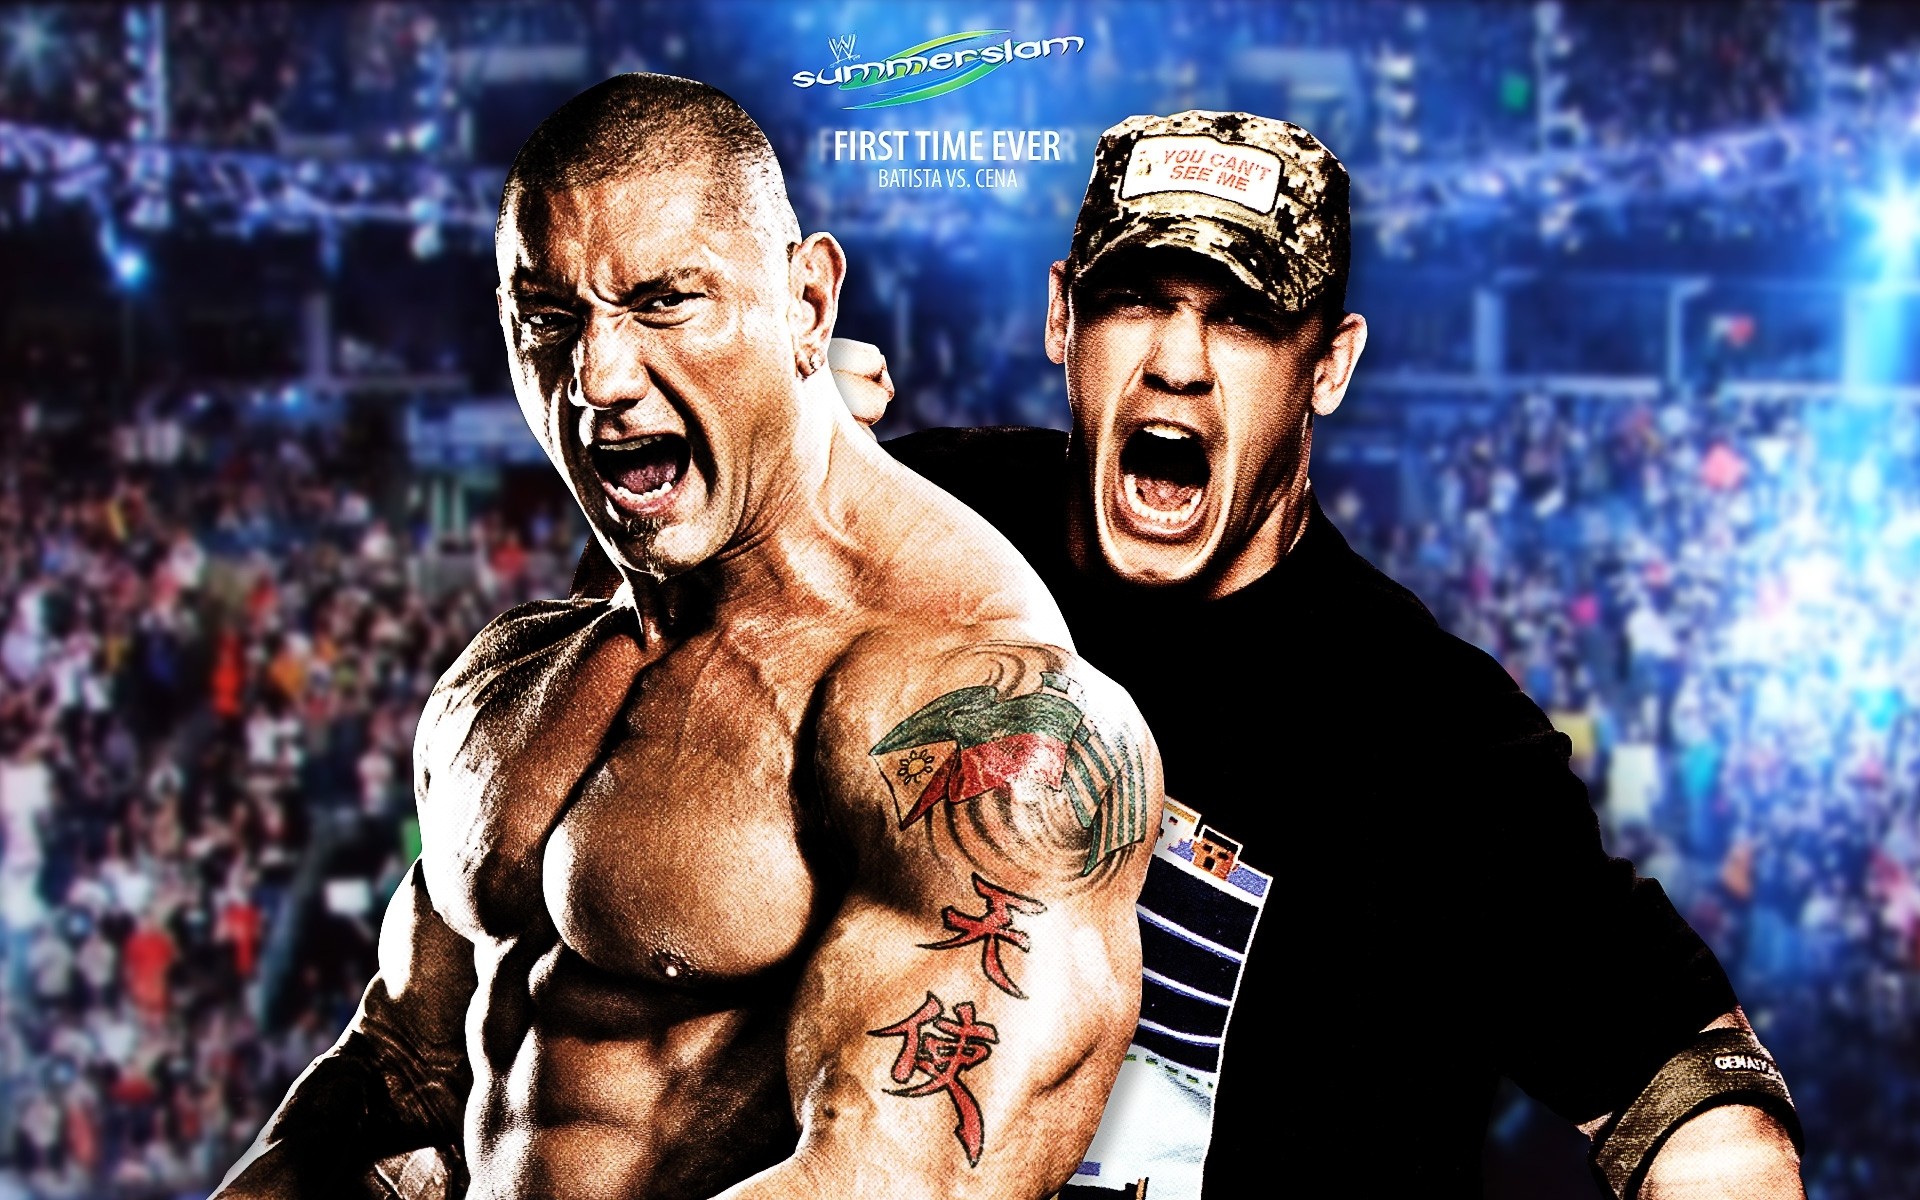 1920x1200 WWE HD wallpaper for download in laptop and desktop